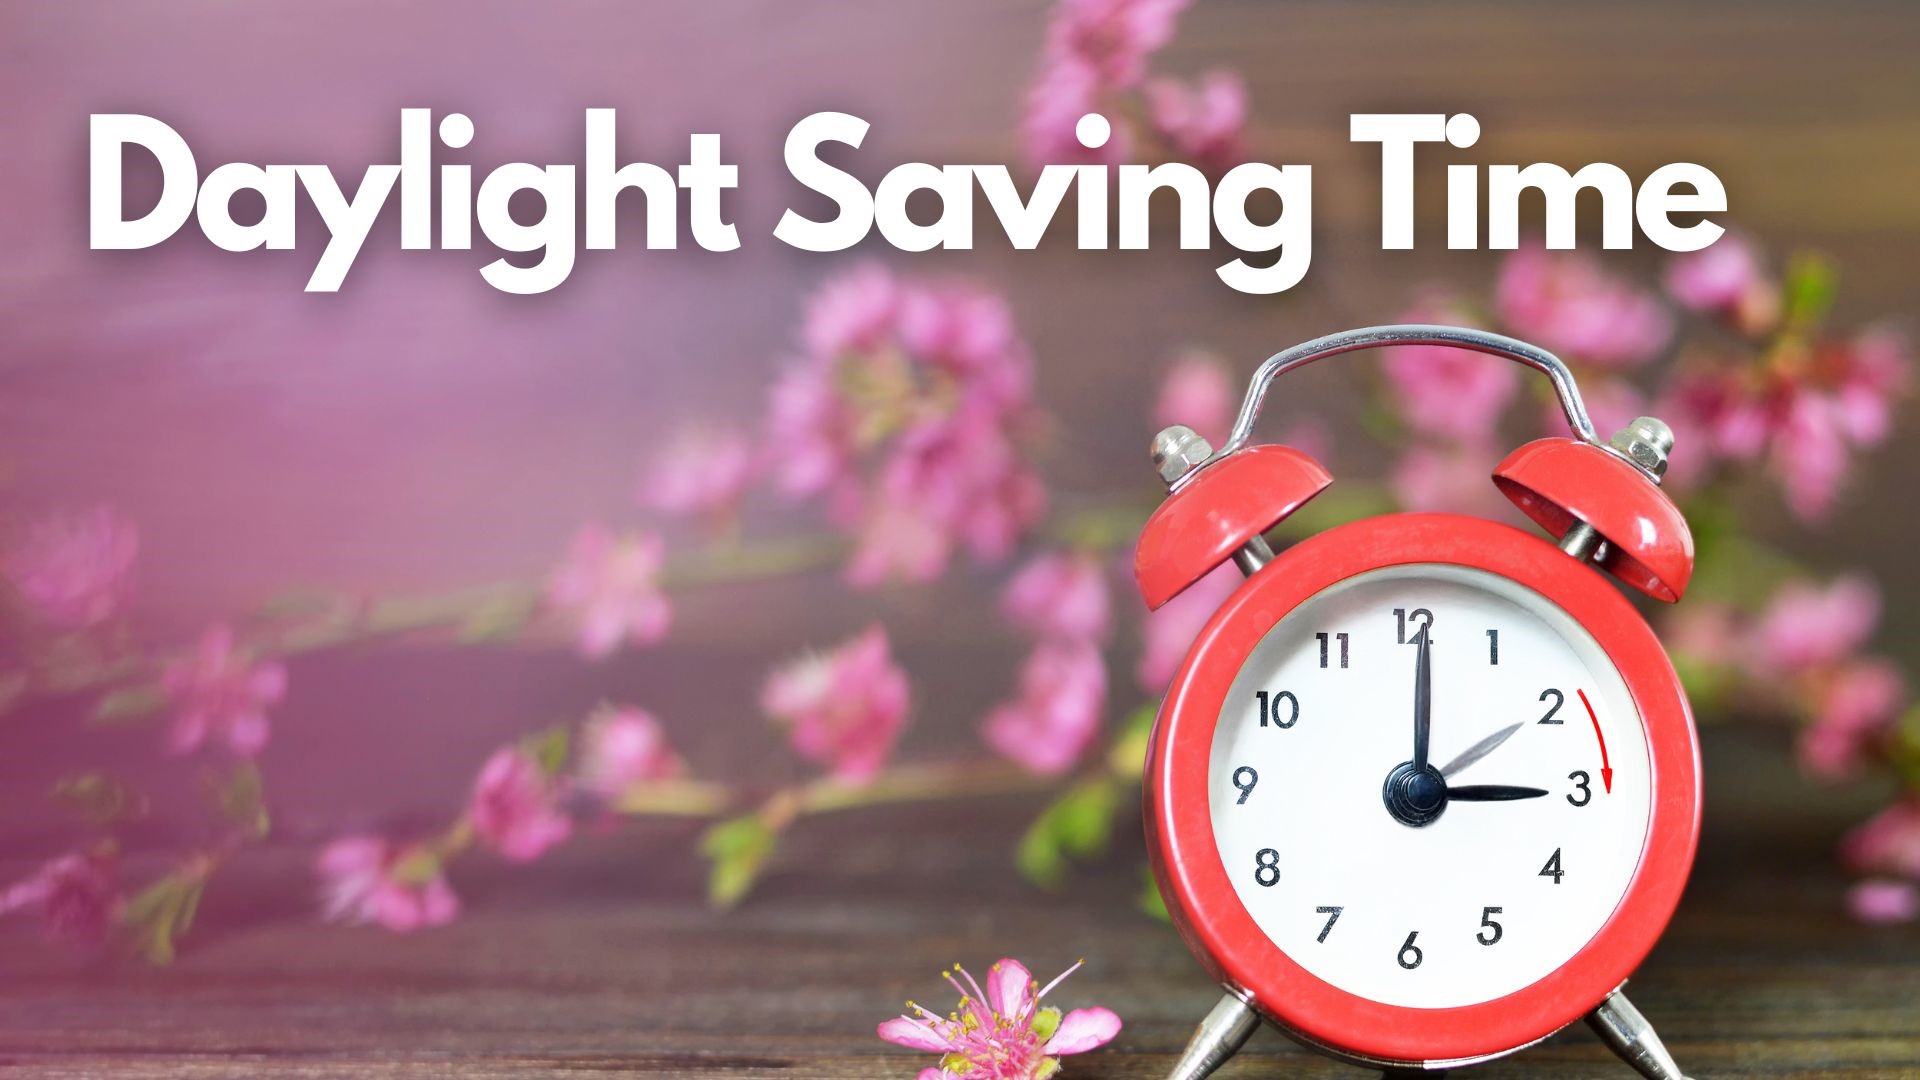 Daylight saving time begins on March 12, 2023. We have a look at how this can impact you and your health, and what you need to know about the time change.